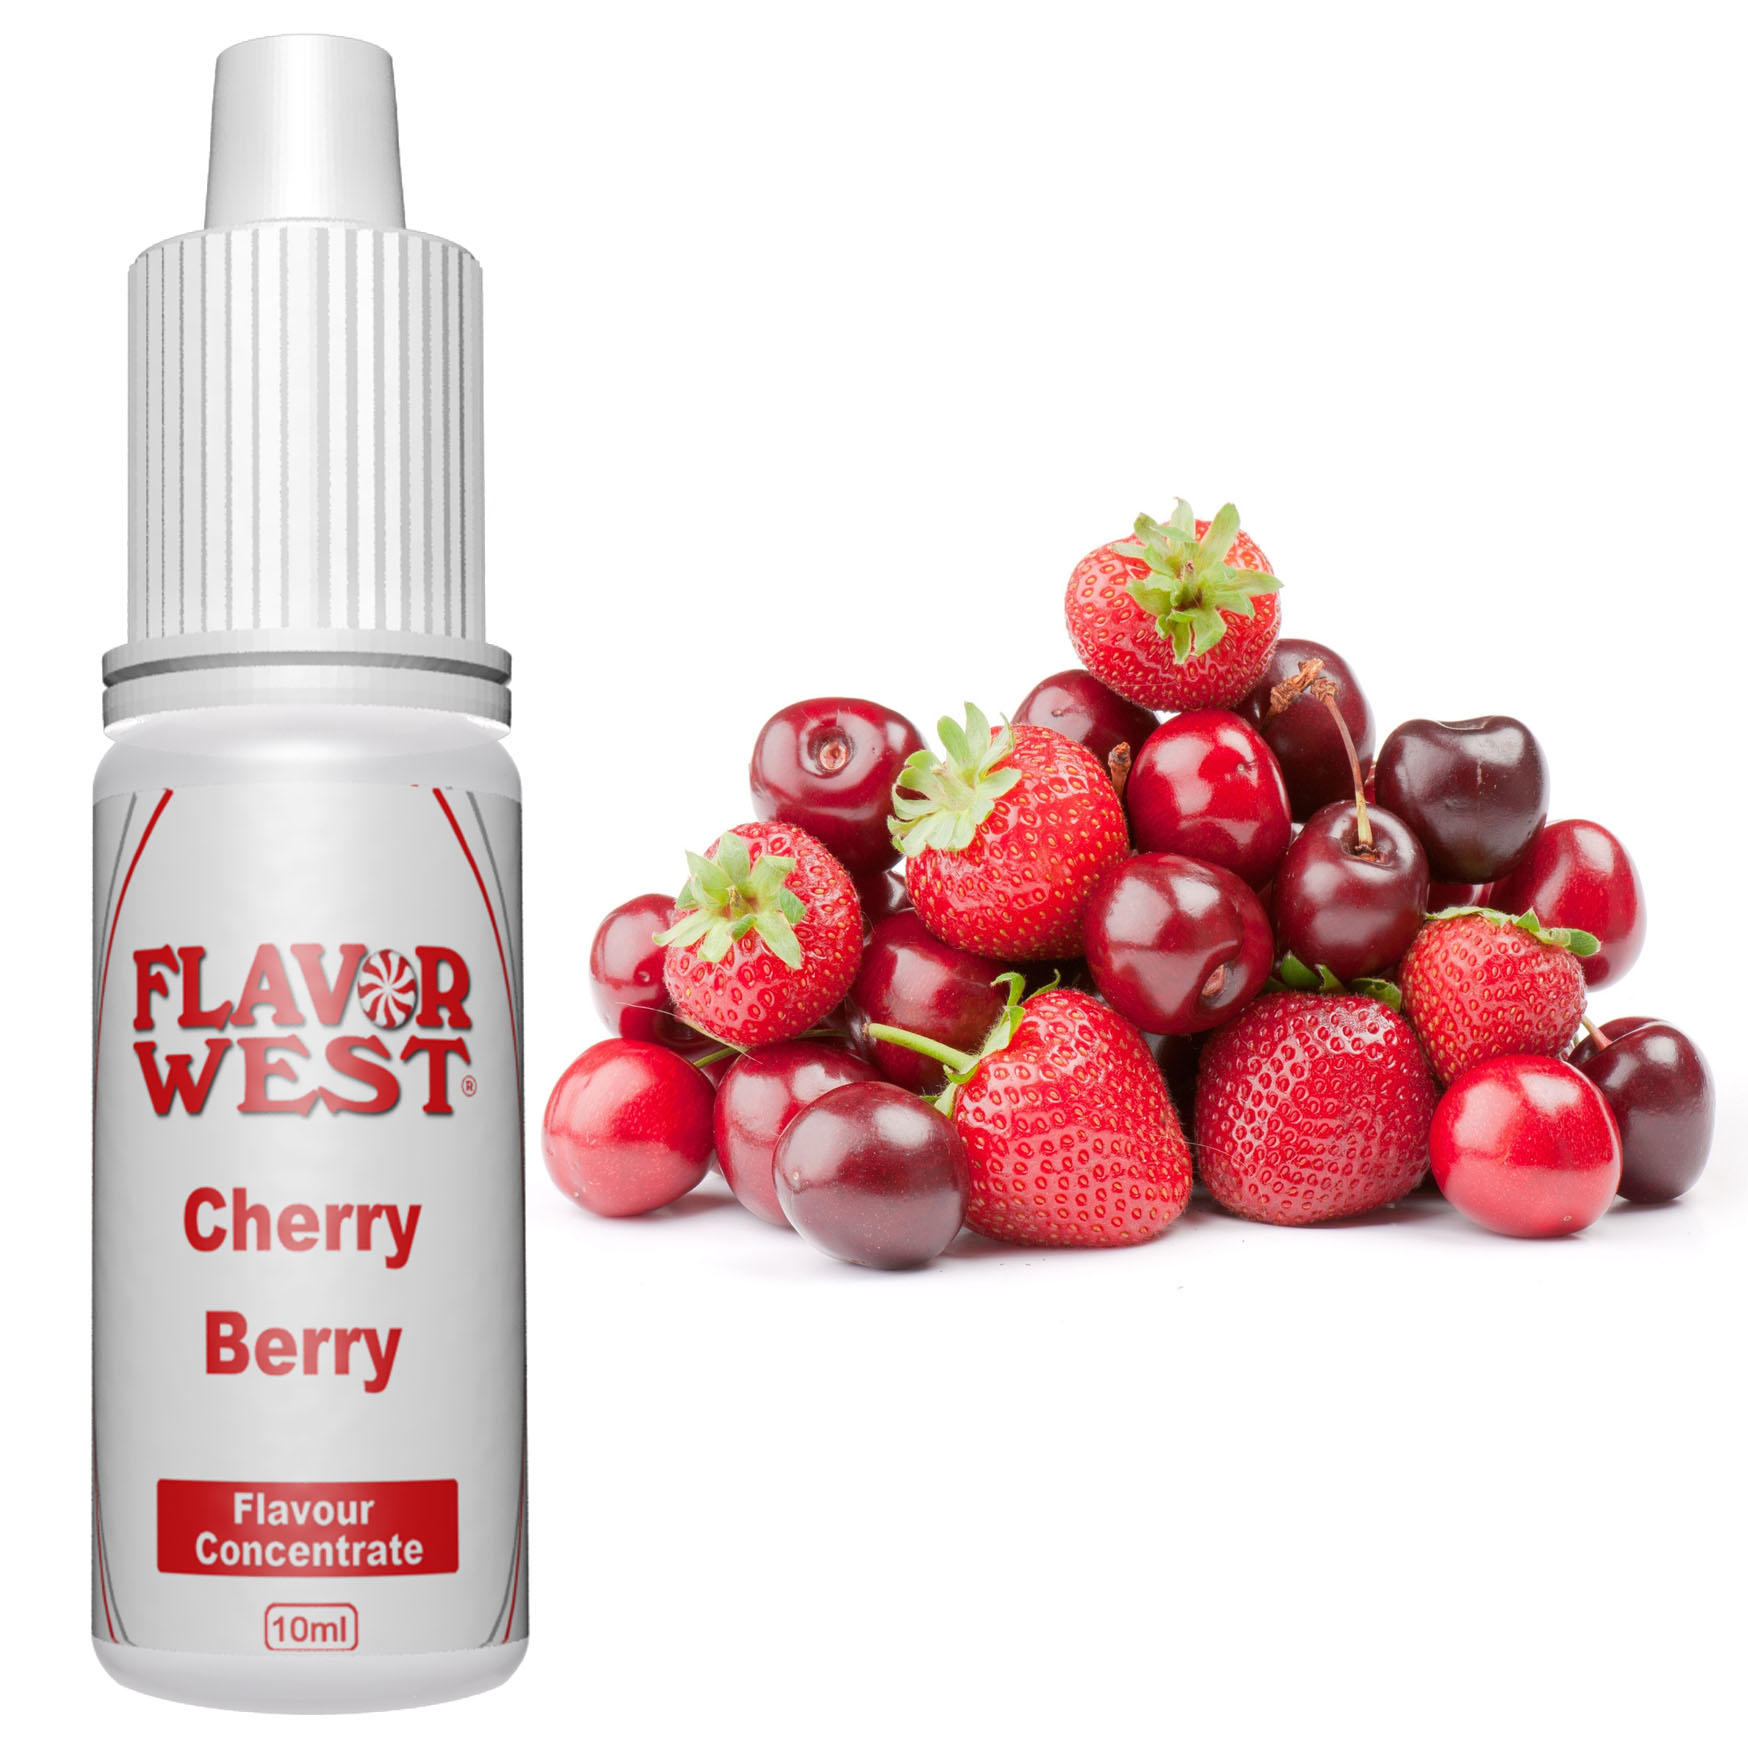 An eclectic blend of berries and cherries in this Cherry Berry flavour from...